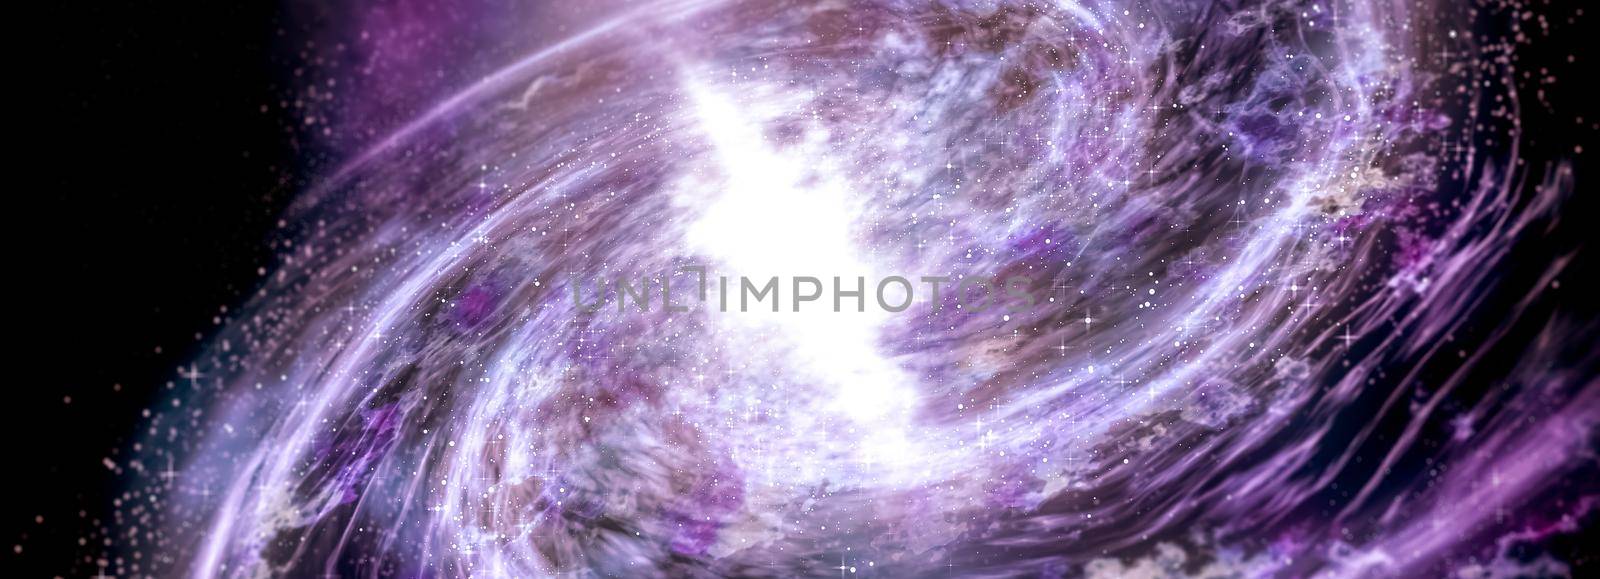 Galaxy background Cosmic deep space